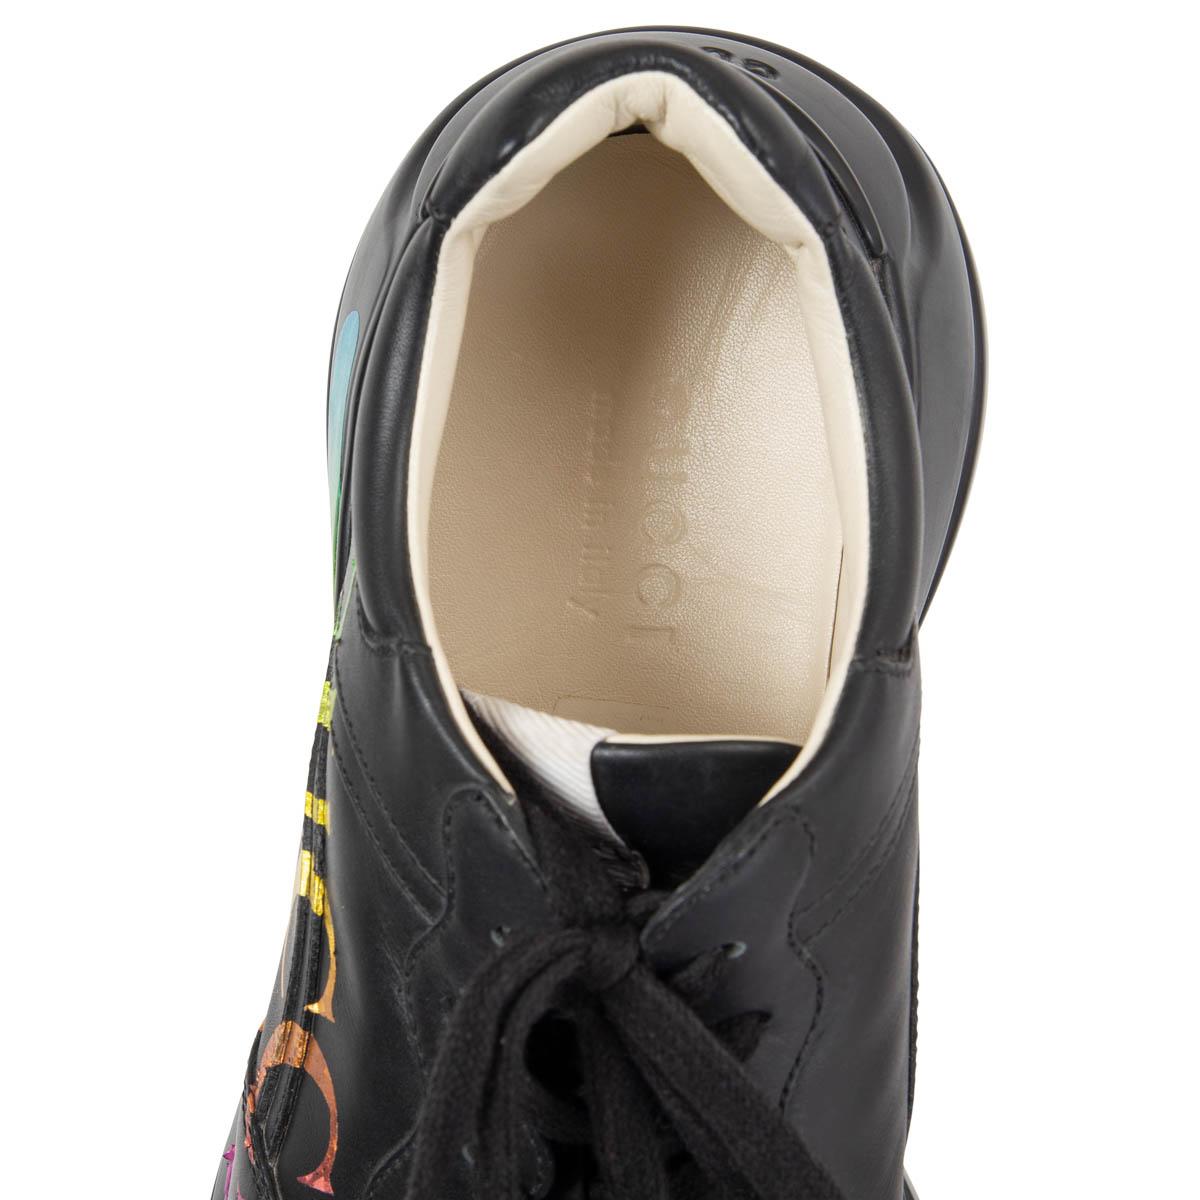 GUCCI black leather RYTHON RAINBOW LOGO Sneakers Shoes 8 42 (mens) or 40 (women) In Excellent Condition For Sale In Zürich, CH